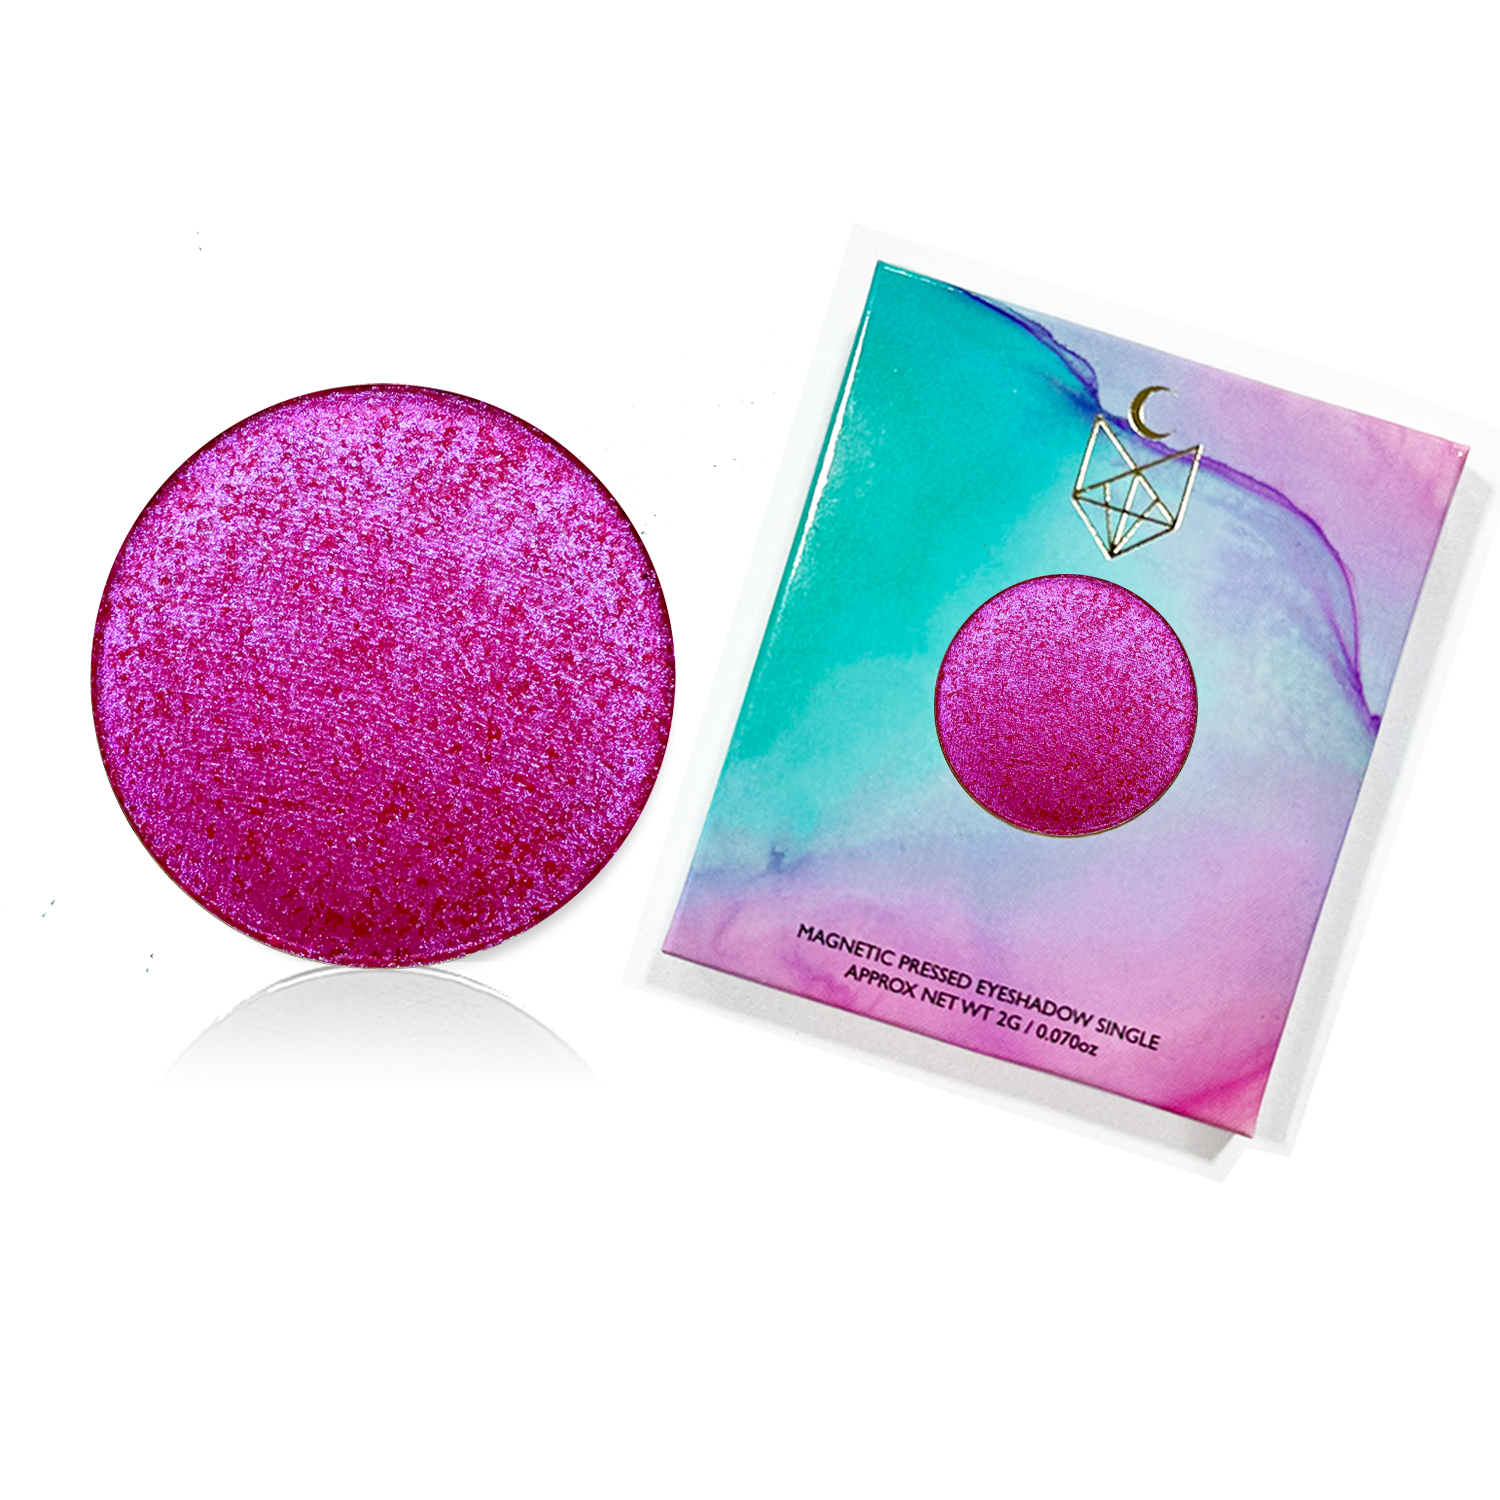 Sugary Sweet Artistry Pressed Pigment